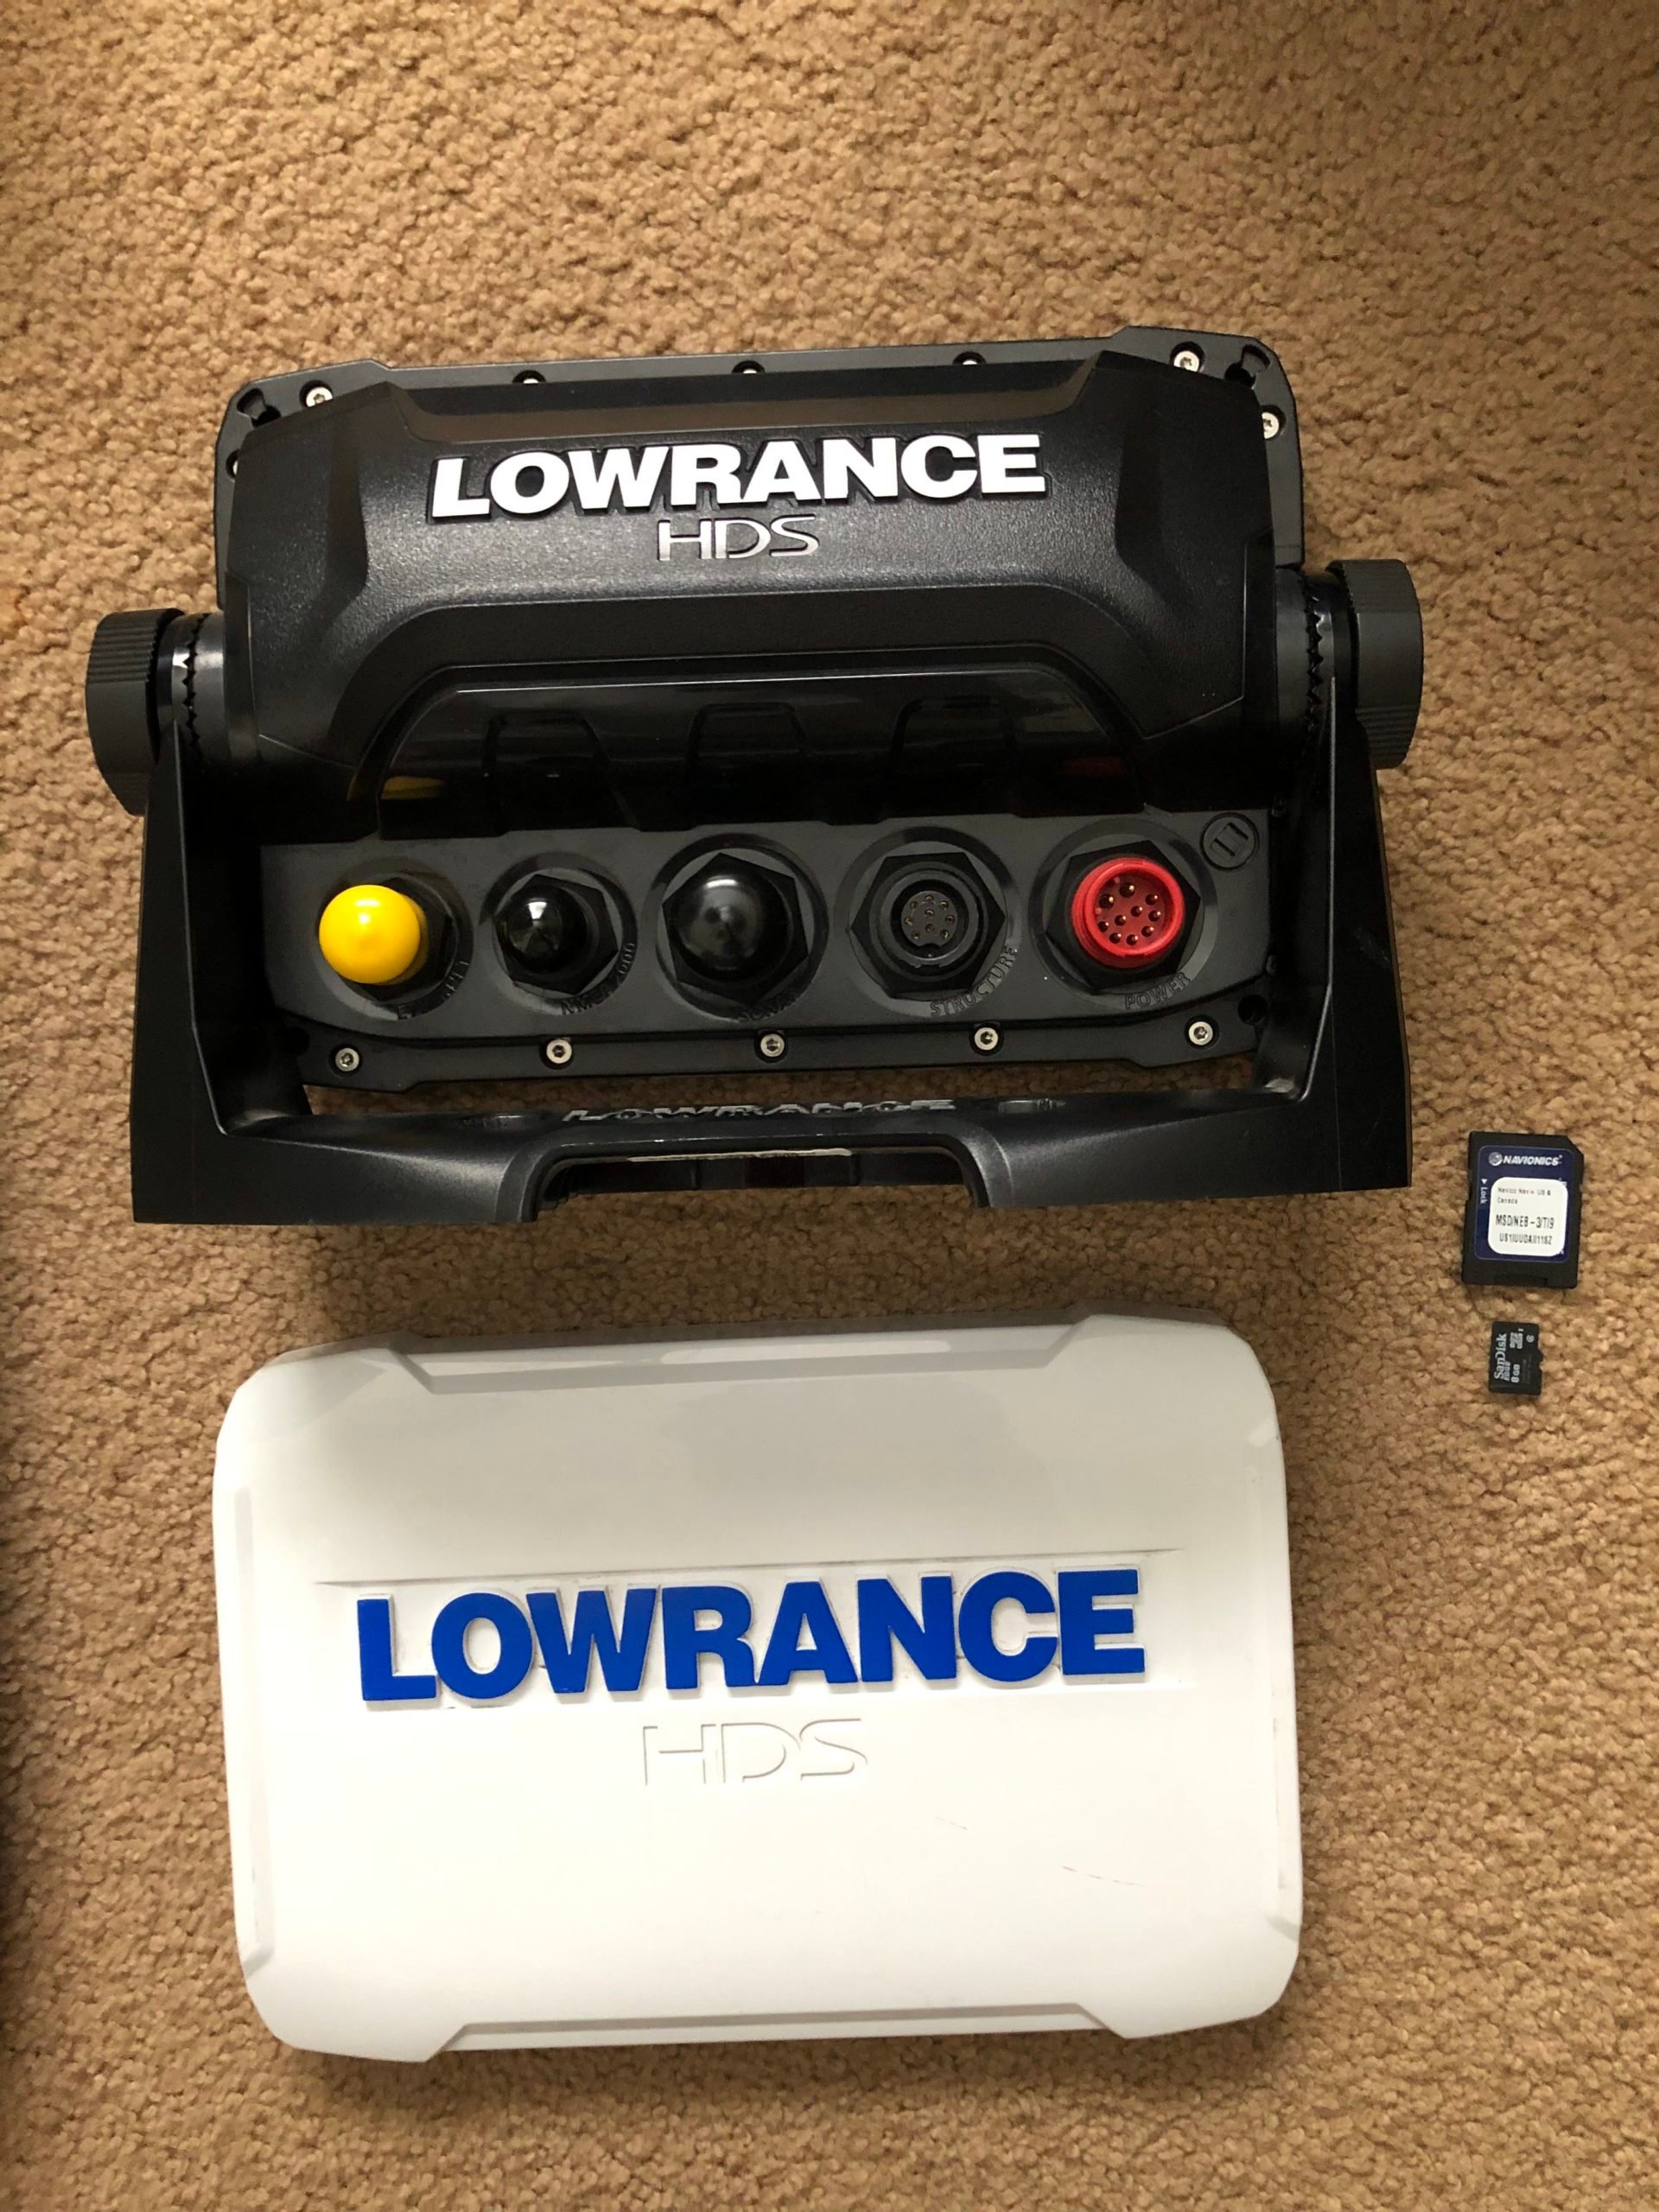 Lowrance HDS 7 GEN 3 touch screen with Totalscan transducer and